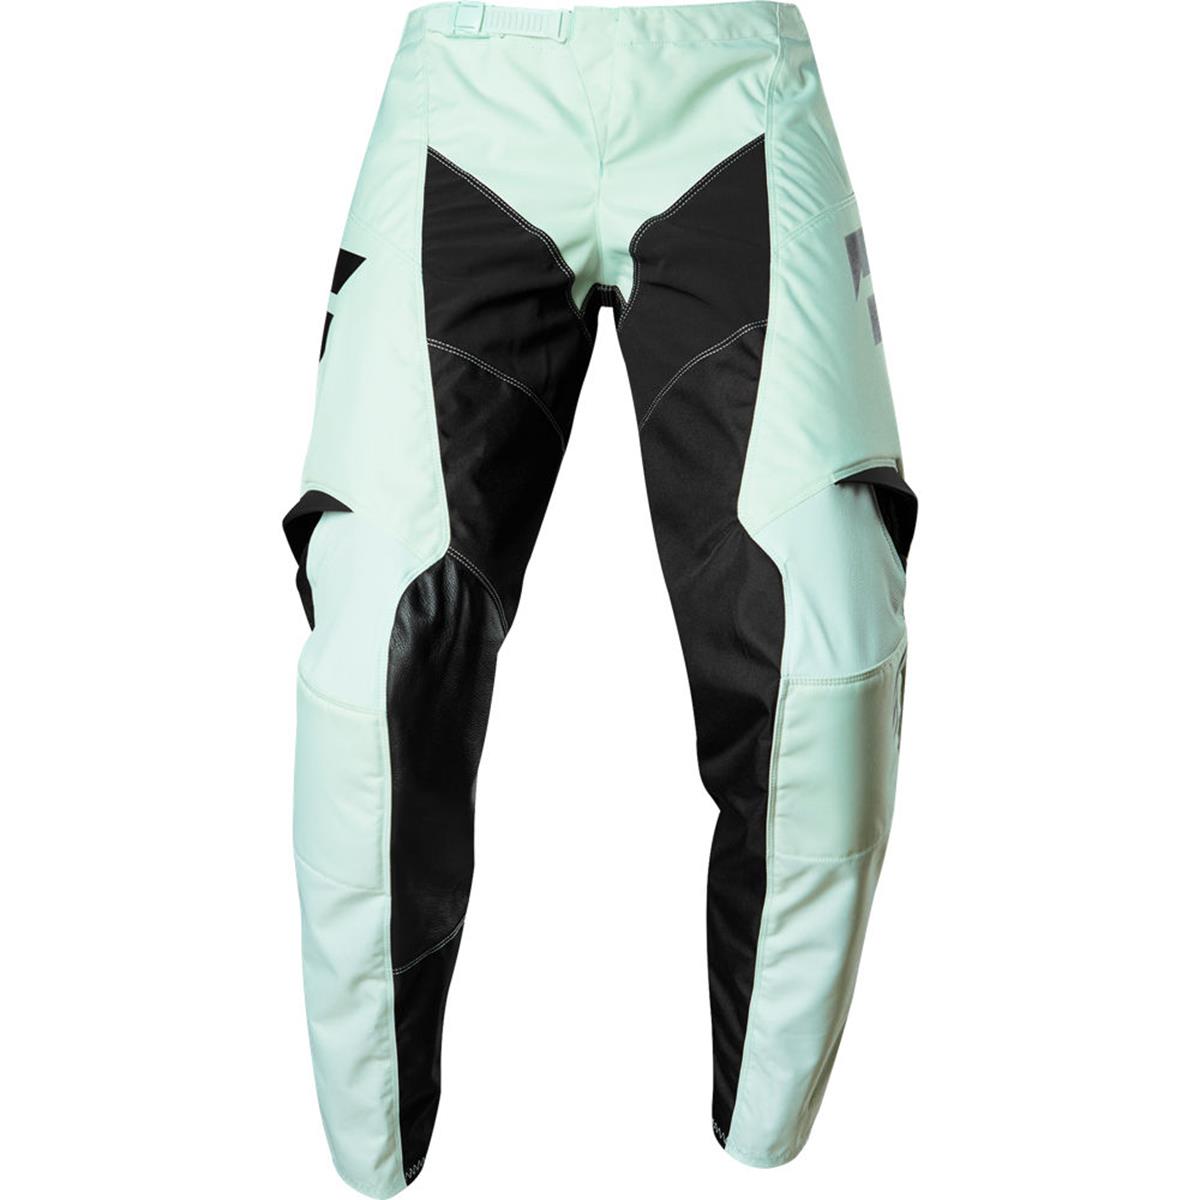 Shift MX Pants Whit3 Label Iceland Black/Mint - Limited Edition